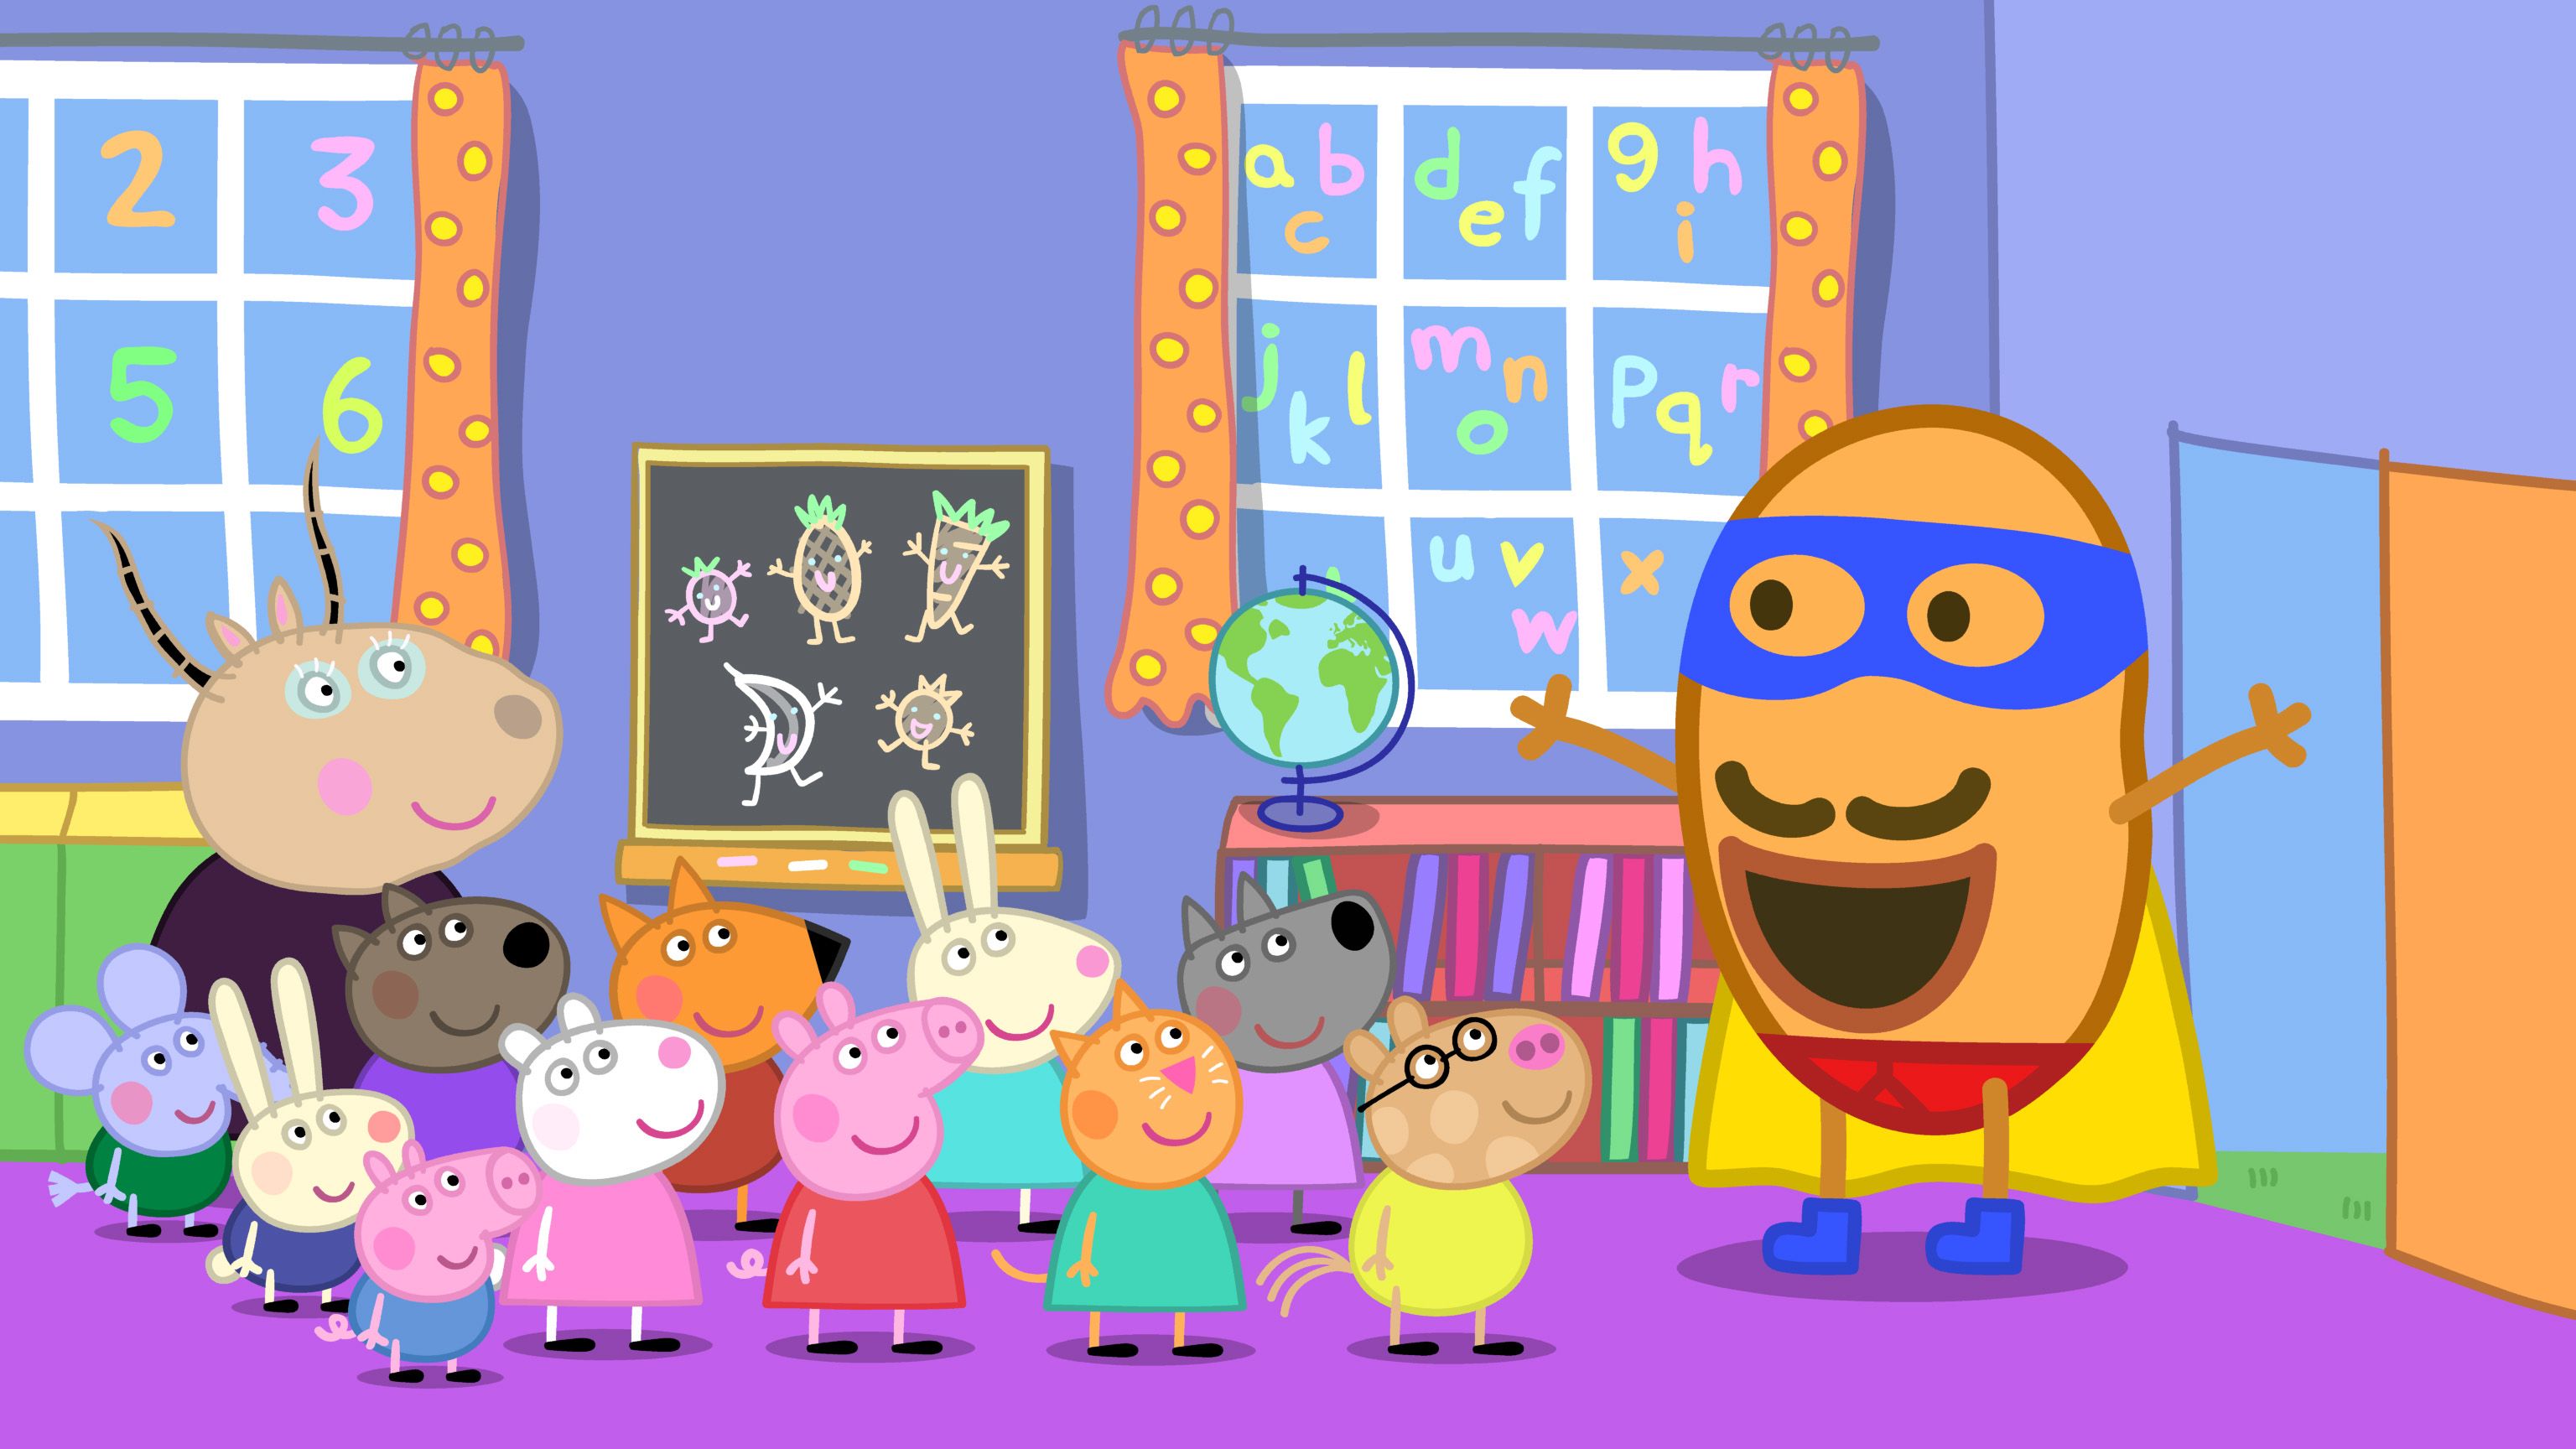 Peppa Pig Meets A Superhero In New Nickelodeon Episodes This May